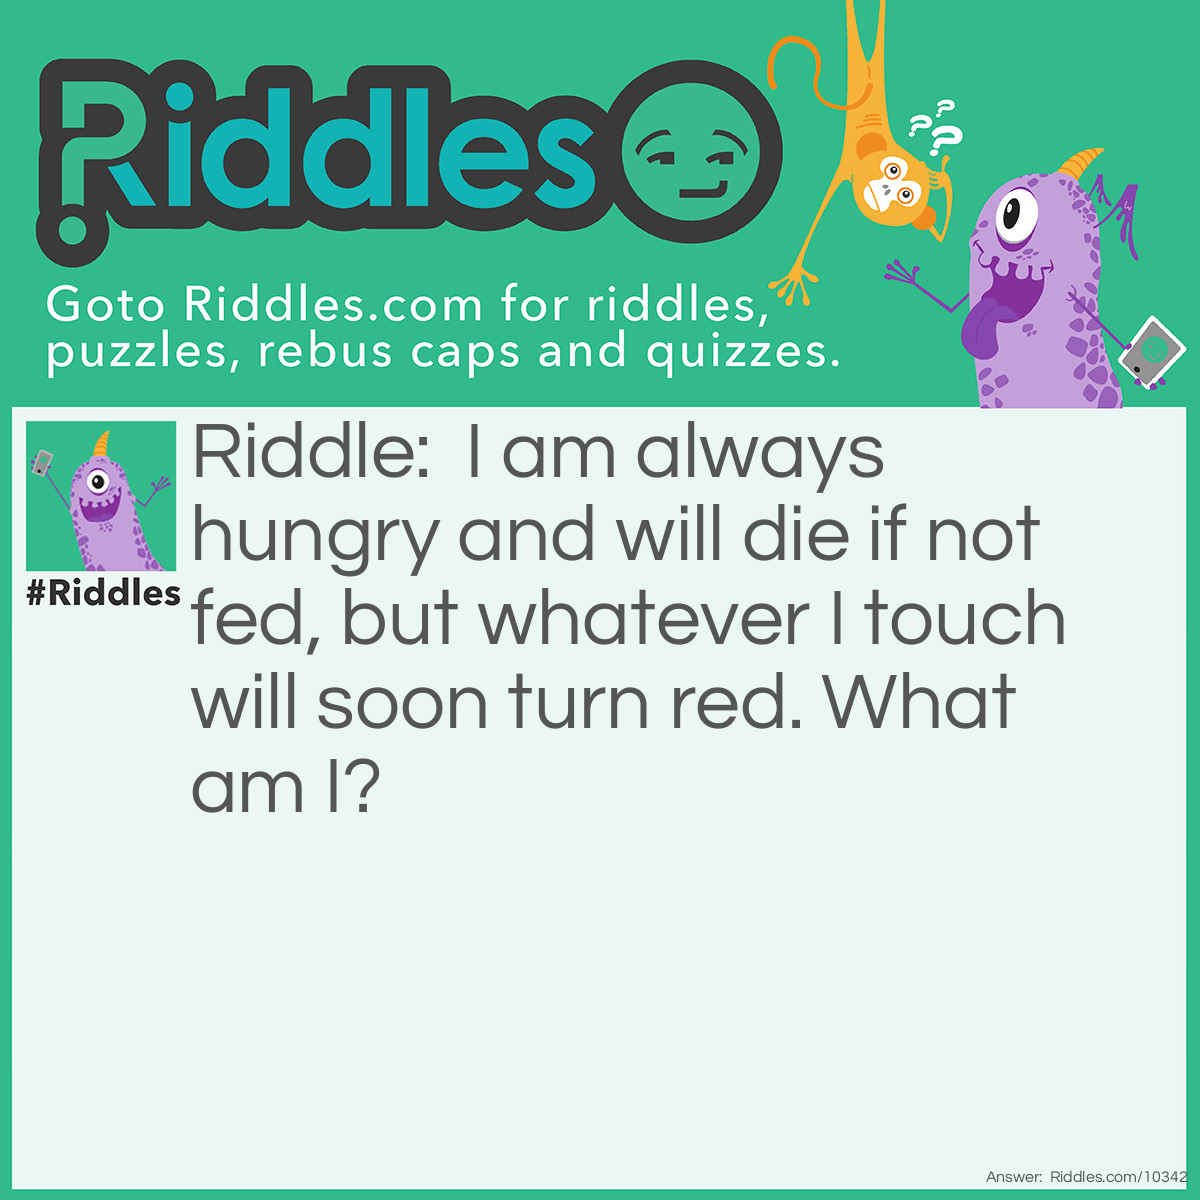 Riddle: I am always hungry and will die if not fed, but whatever I touch will soon turn red. What am I? Answer: Fire.